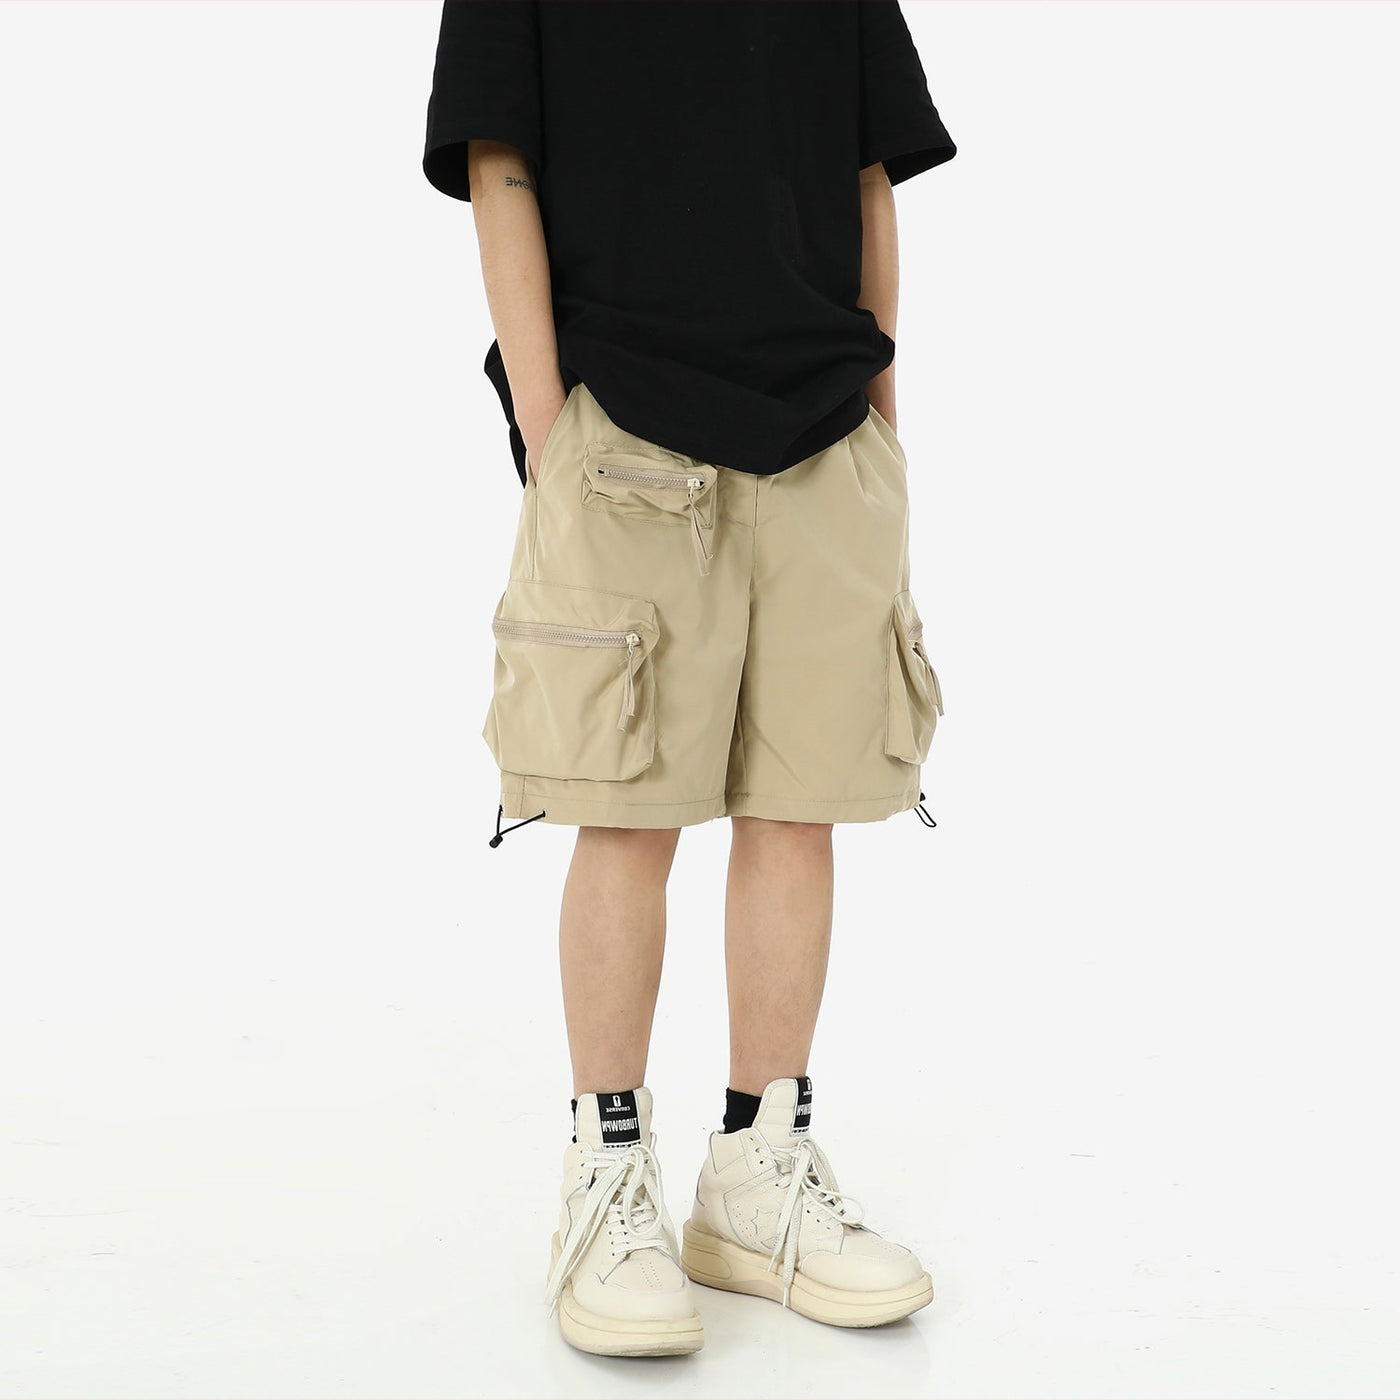 Casual Tie Waist Cargo Shorts Korean Street Fashion Shorts By MEBXX Shop Online at OH Vault